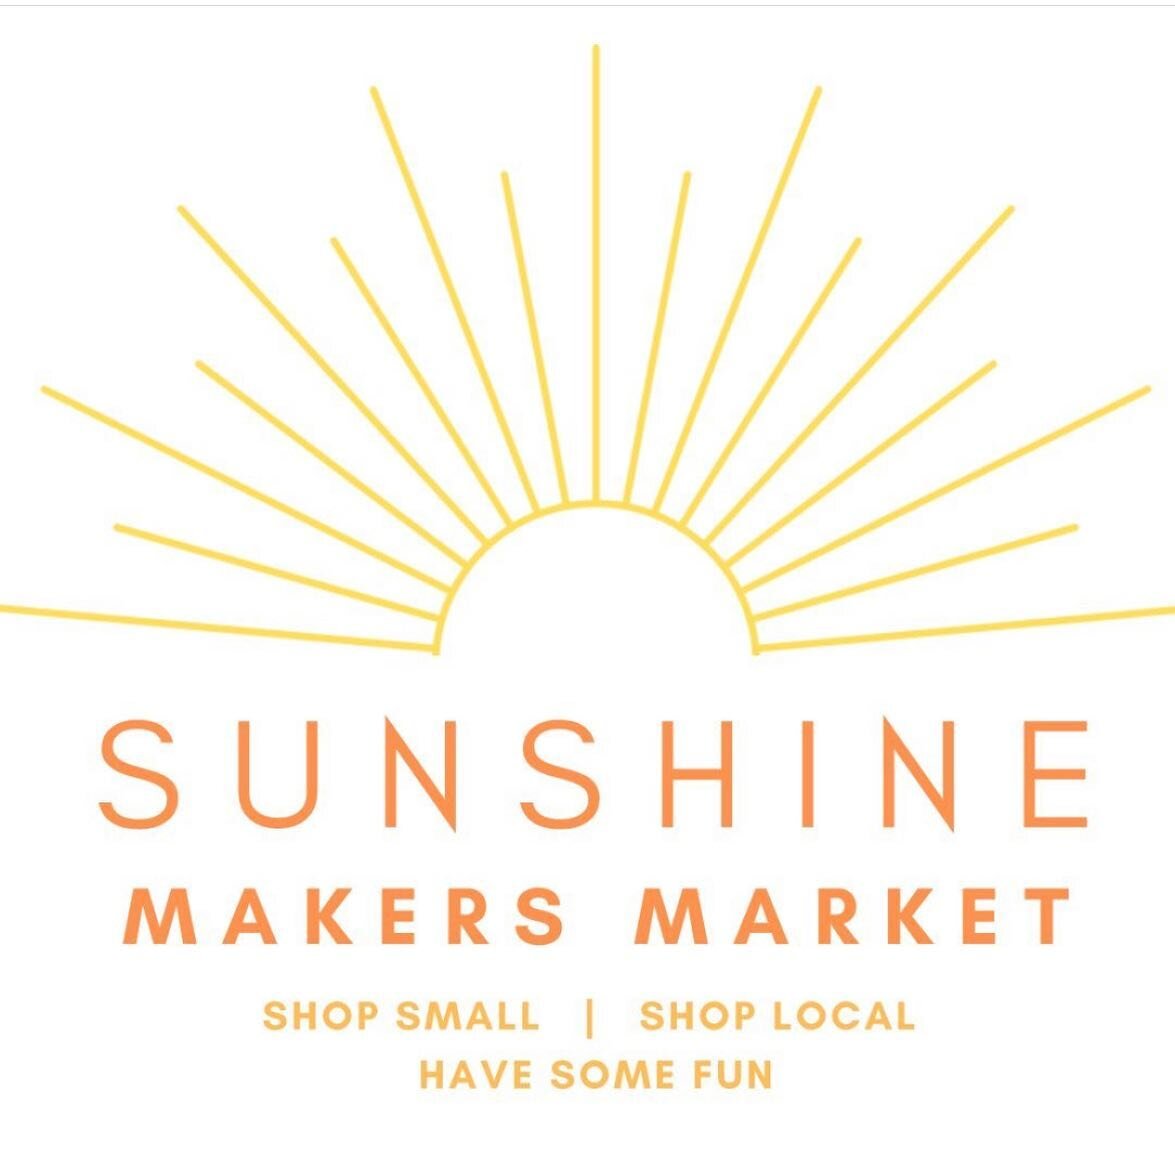 ☀️As some of you may know, we&rsquo;ve wanted to start a makers market pretty much since our first accidental pop up launching Little Chimes in 2021.  After close to 2 years of nurturing + growing LC, we&rsquo;ve finally had the time (well, just a li